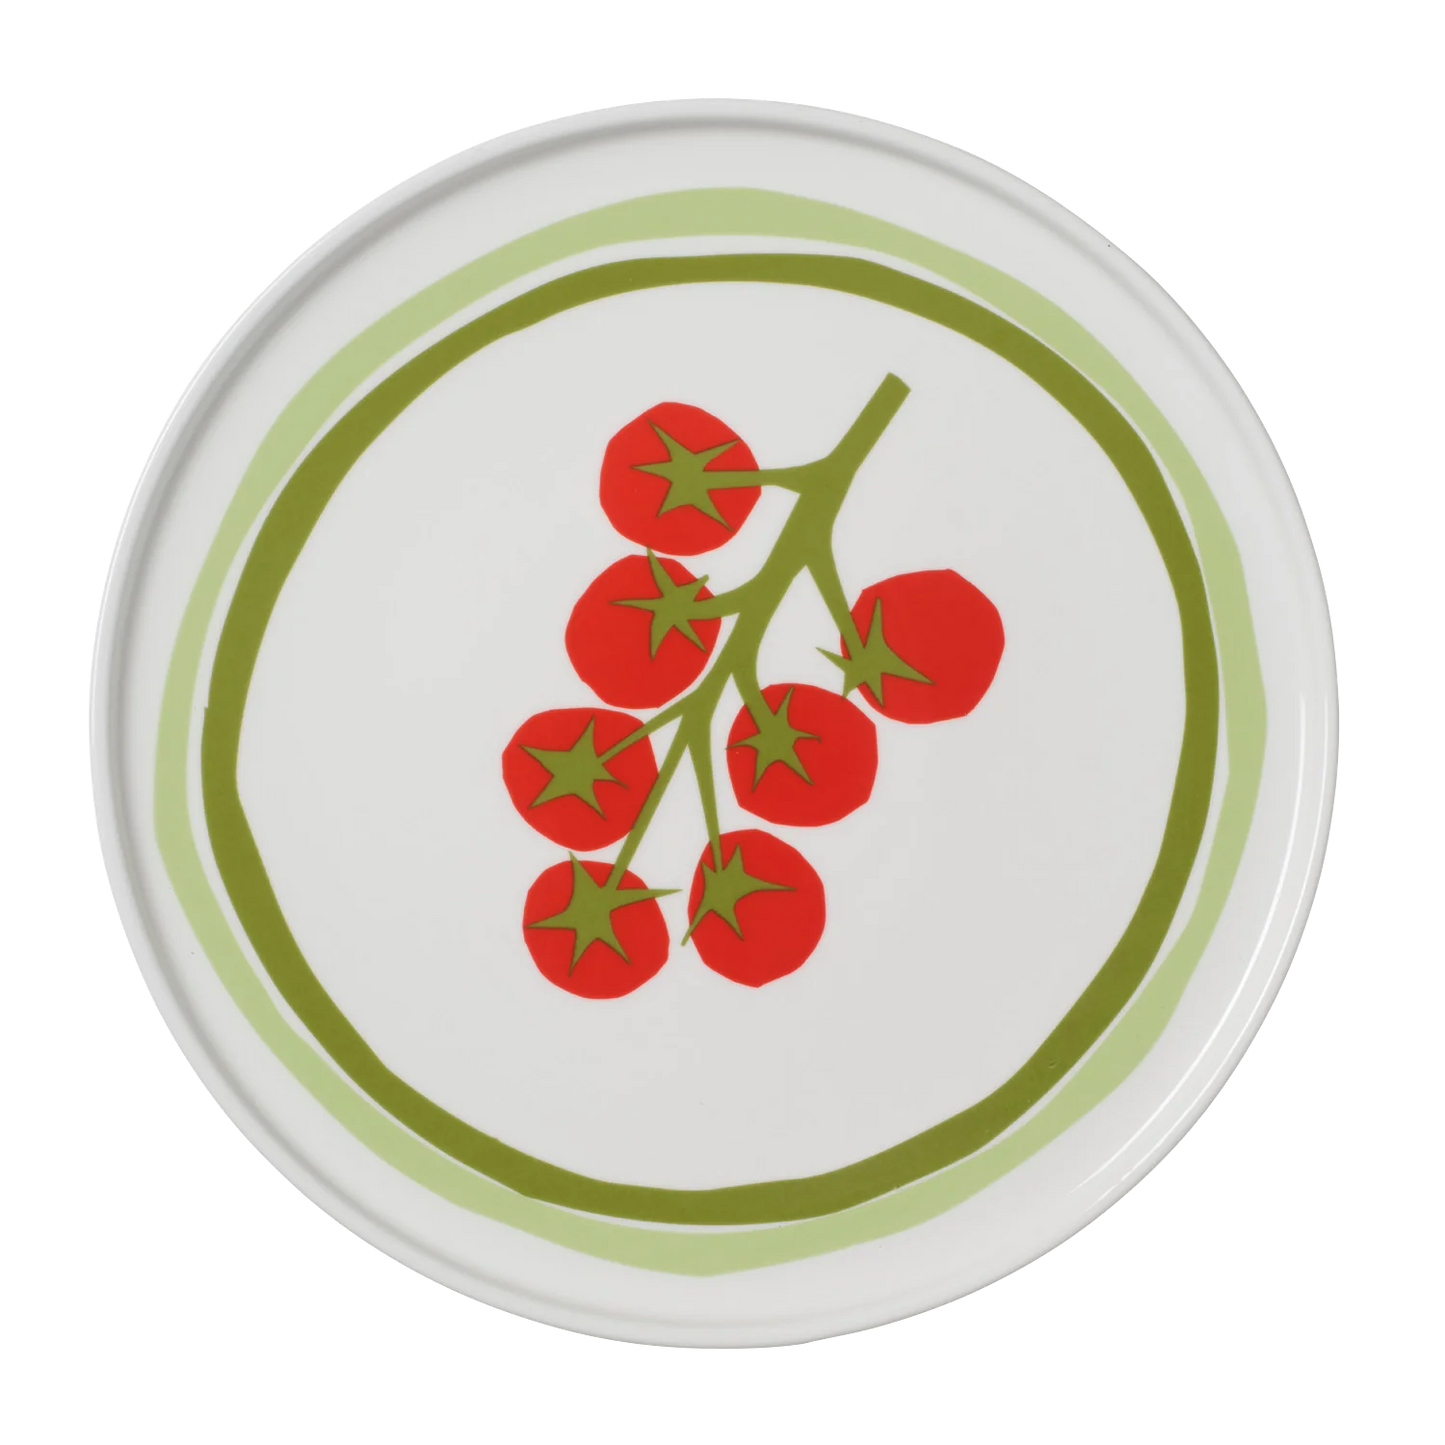 Tomato Plate - CLICK & COLLECT ONLY